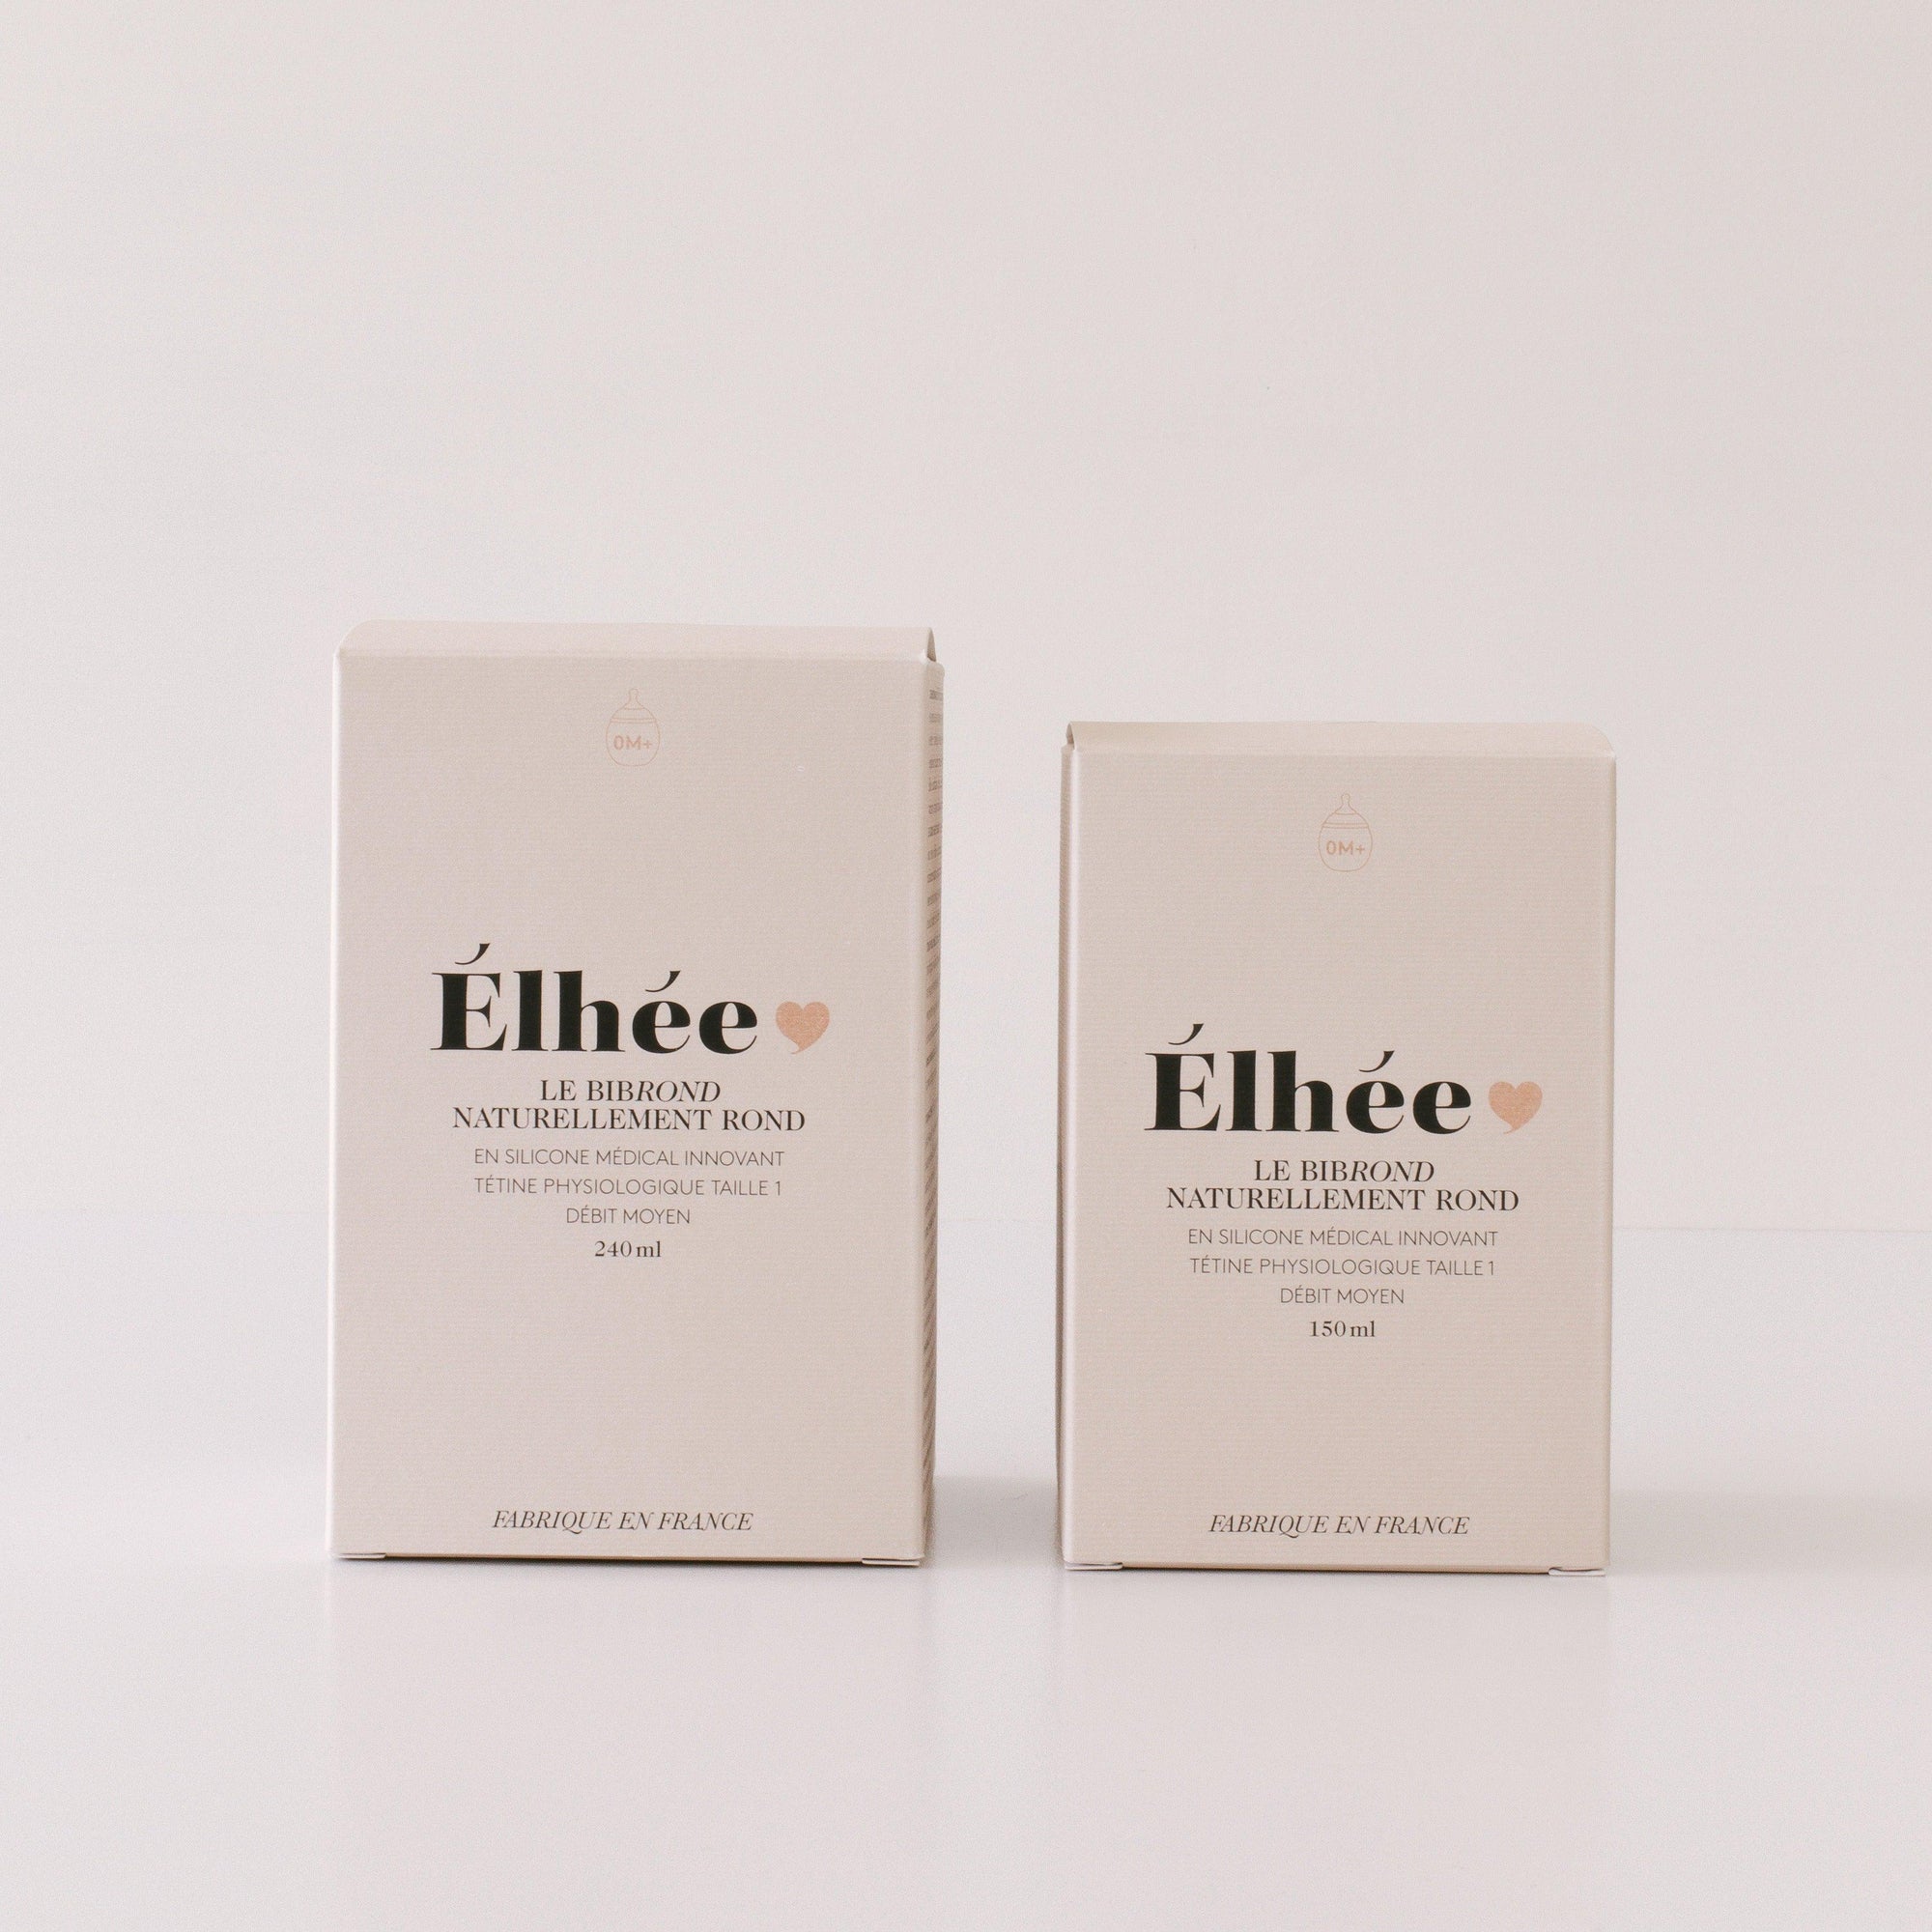 Two boxes of Elhée France's baby bottles on a white surface.